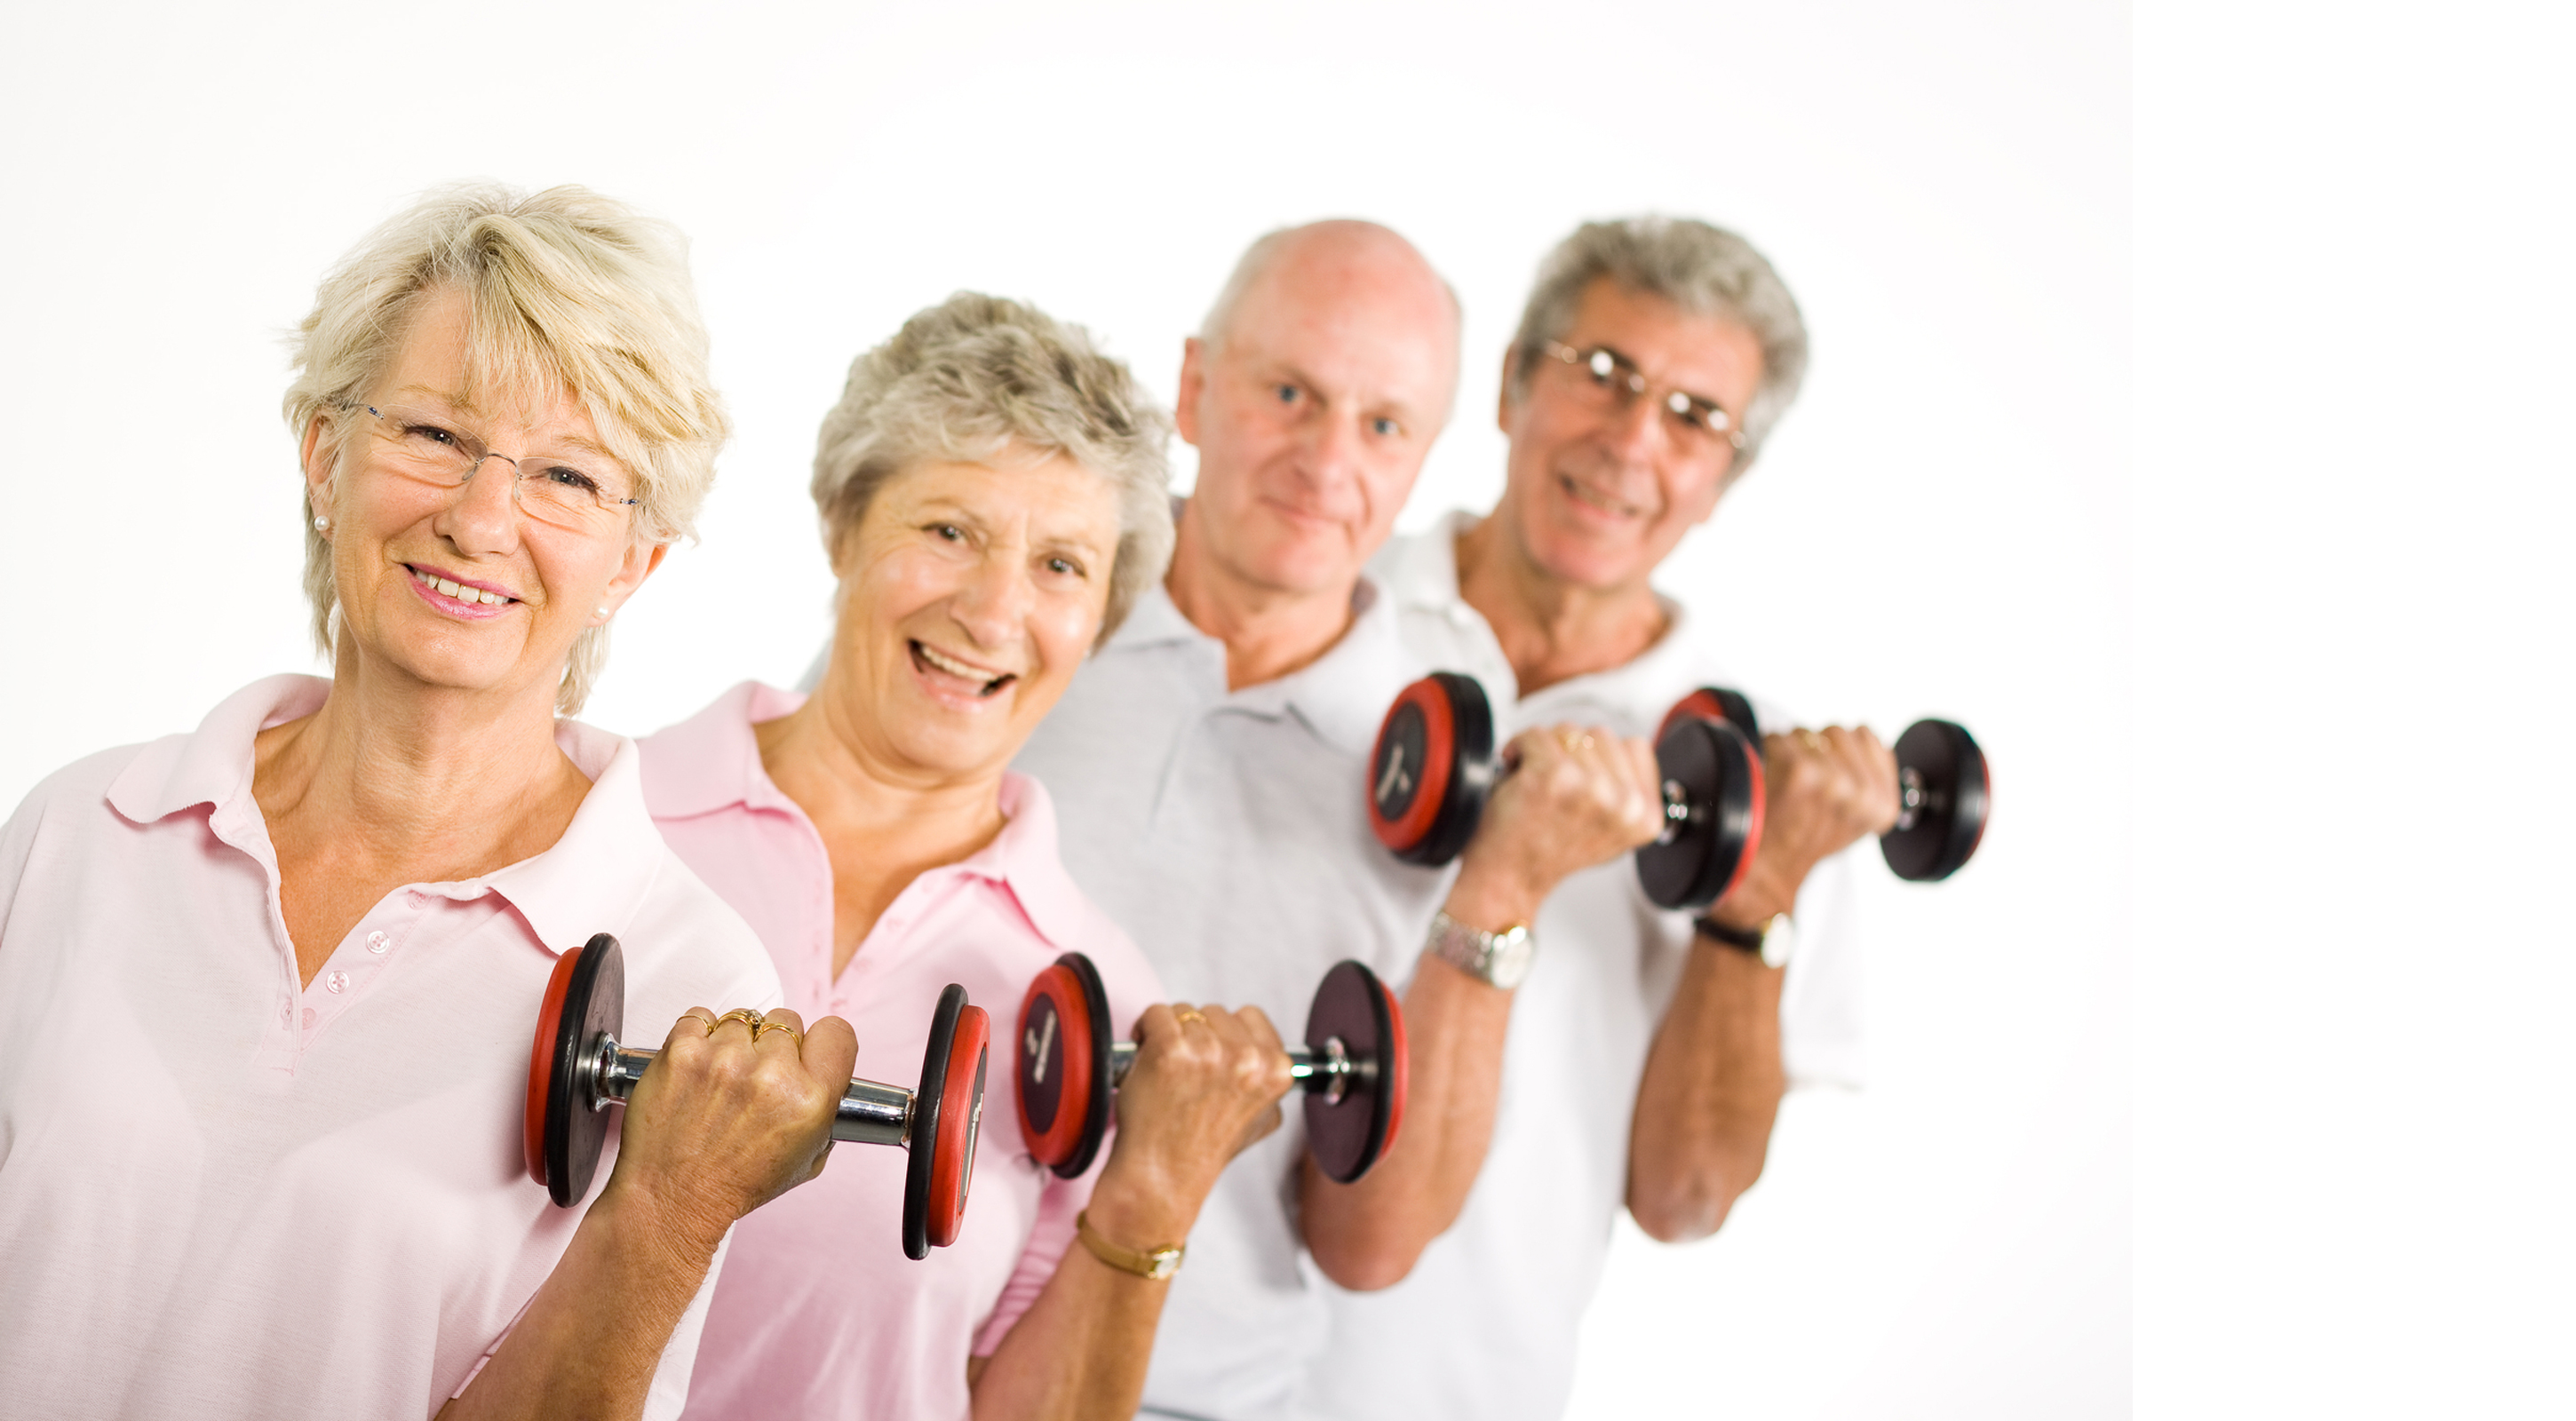 beneficial Pflugerville exercise for osteoporosis